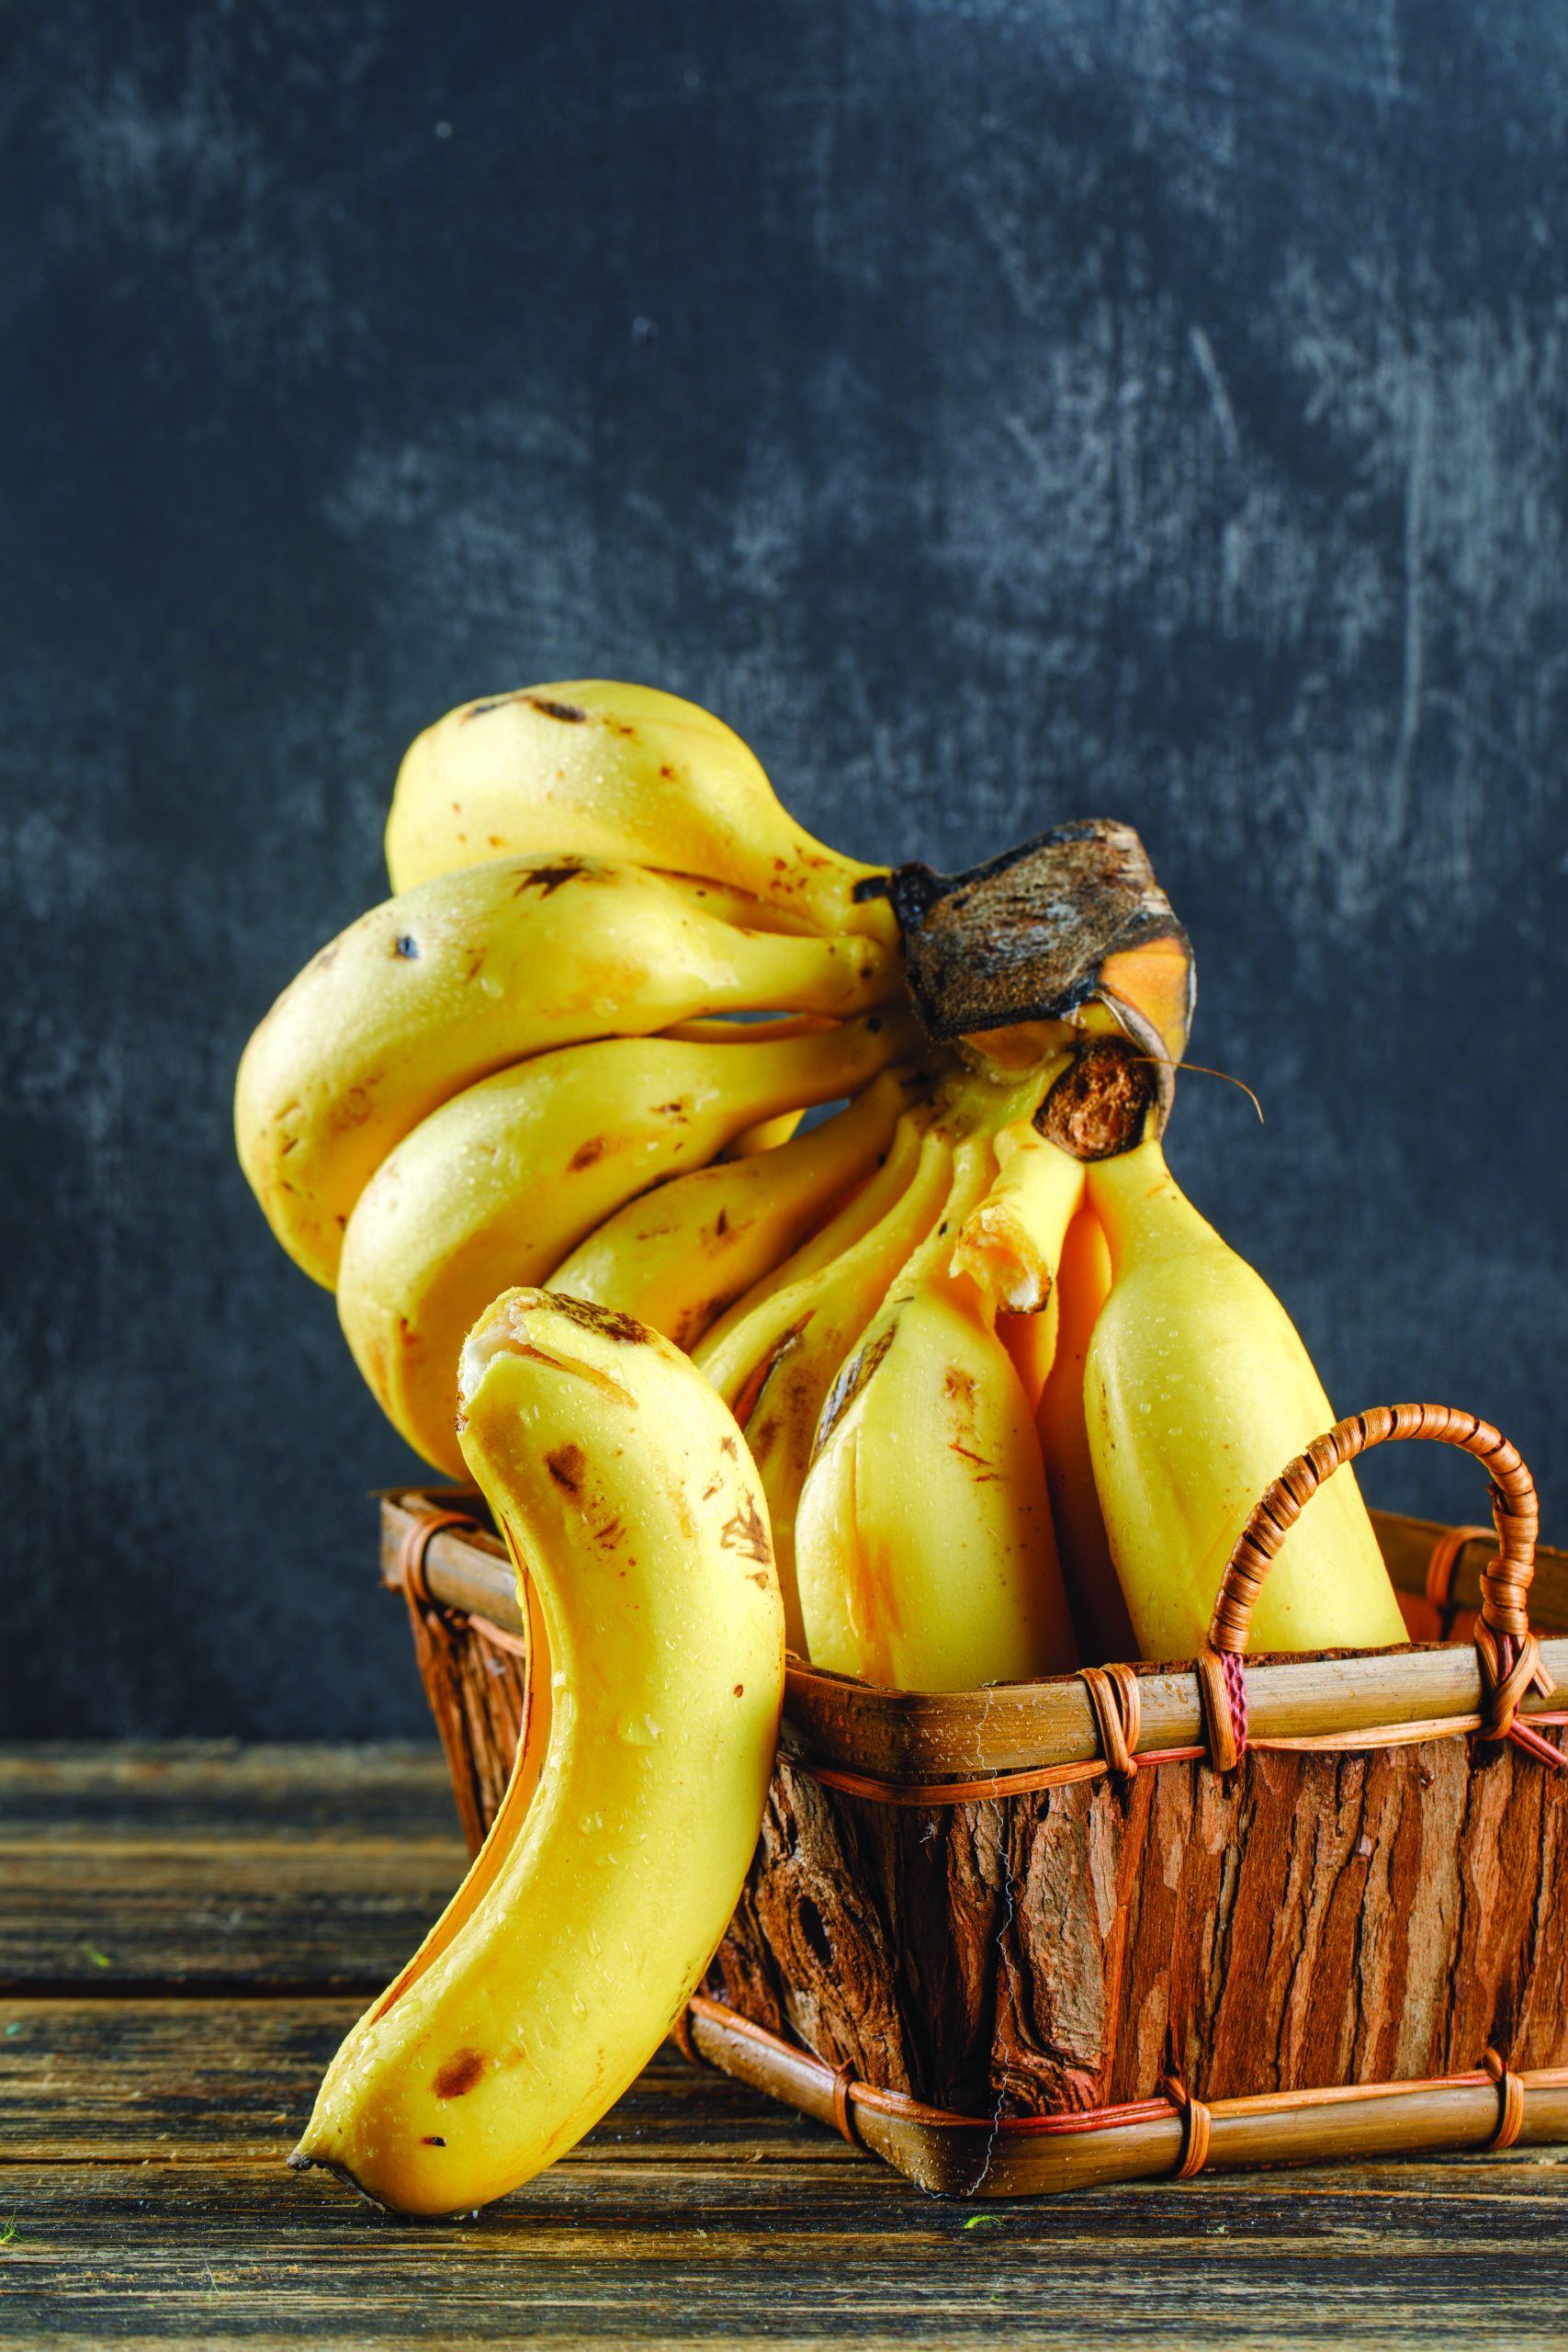 Bananas in a basket on wooden and plaster background. side view.